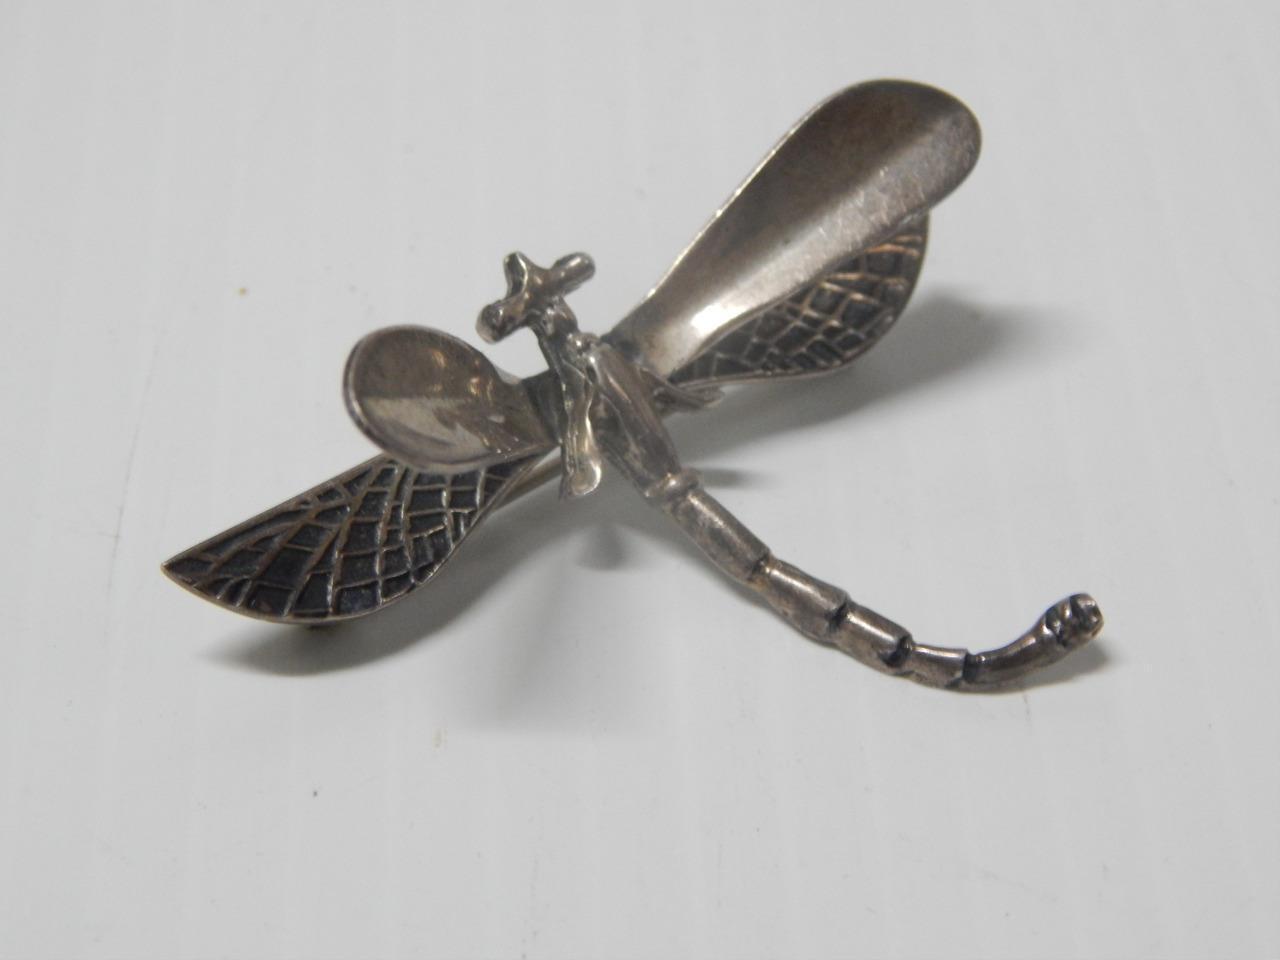 MEXICAN TAXCO STERLING SILVER PIN DRAGONFLY PIN - FINE AND NICE DETAILING - OLD